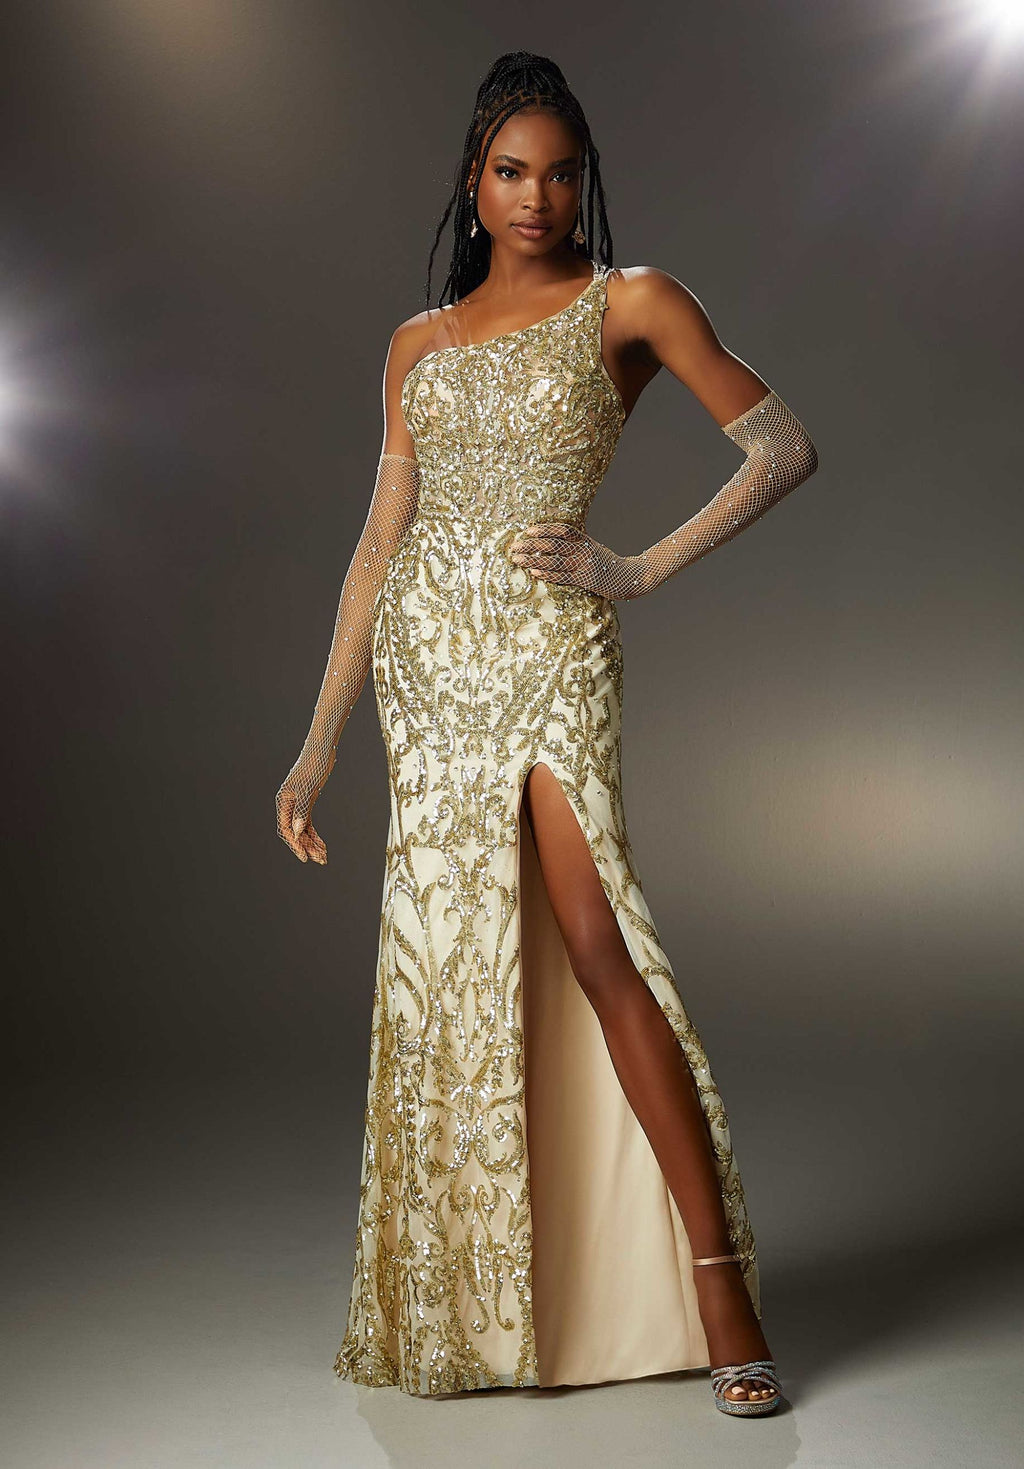 Have a major fashion moment in this amazing Morilee long fitted dress 47002. The neckline showcases scalloped details among the trim and the single shoulder branches into three thin beaded straps across your back. The bodice is made from a sheer illusion decked in a gorgeous pattern of sequins beadwork and travels down the long skirt. A front side slit and sweeping train add to the glam factor.